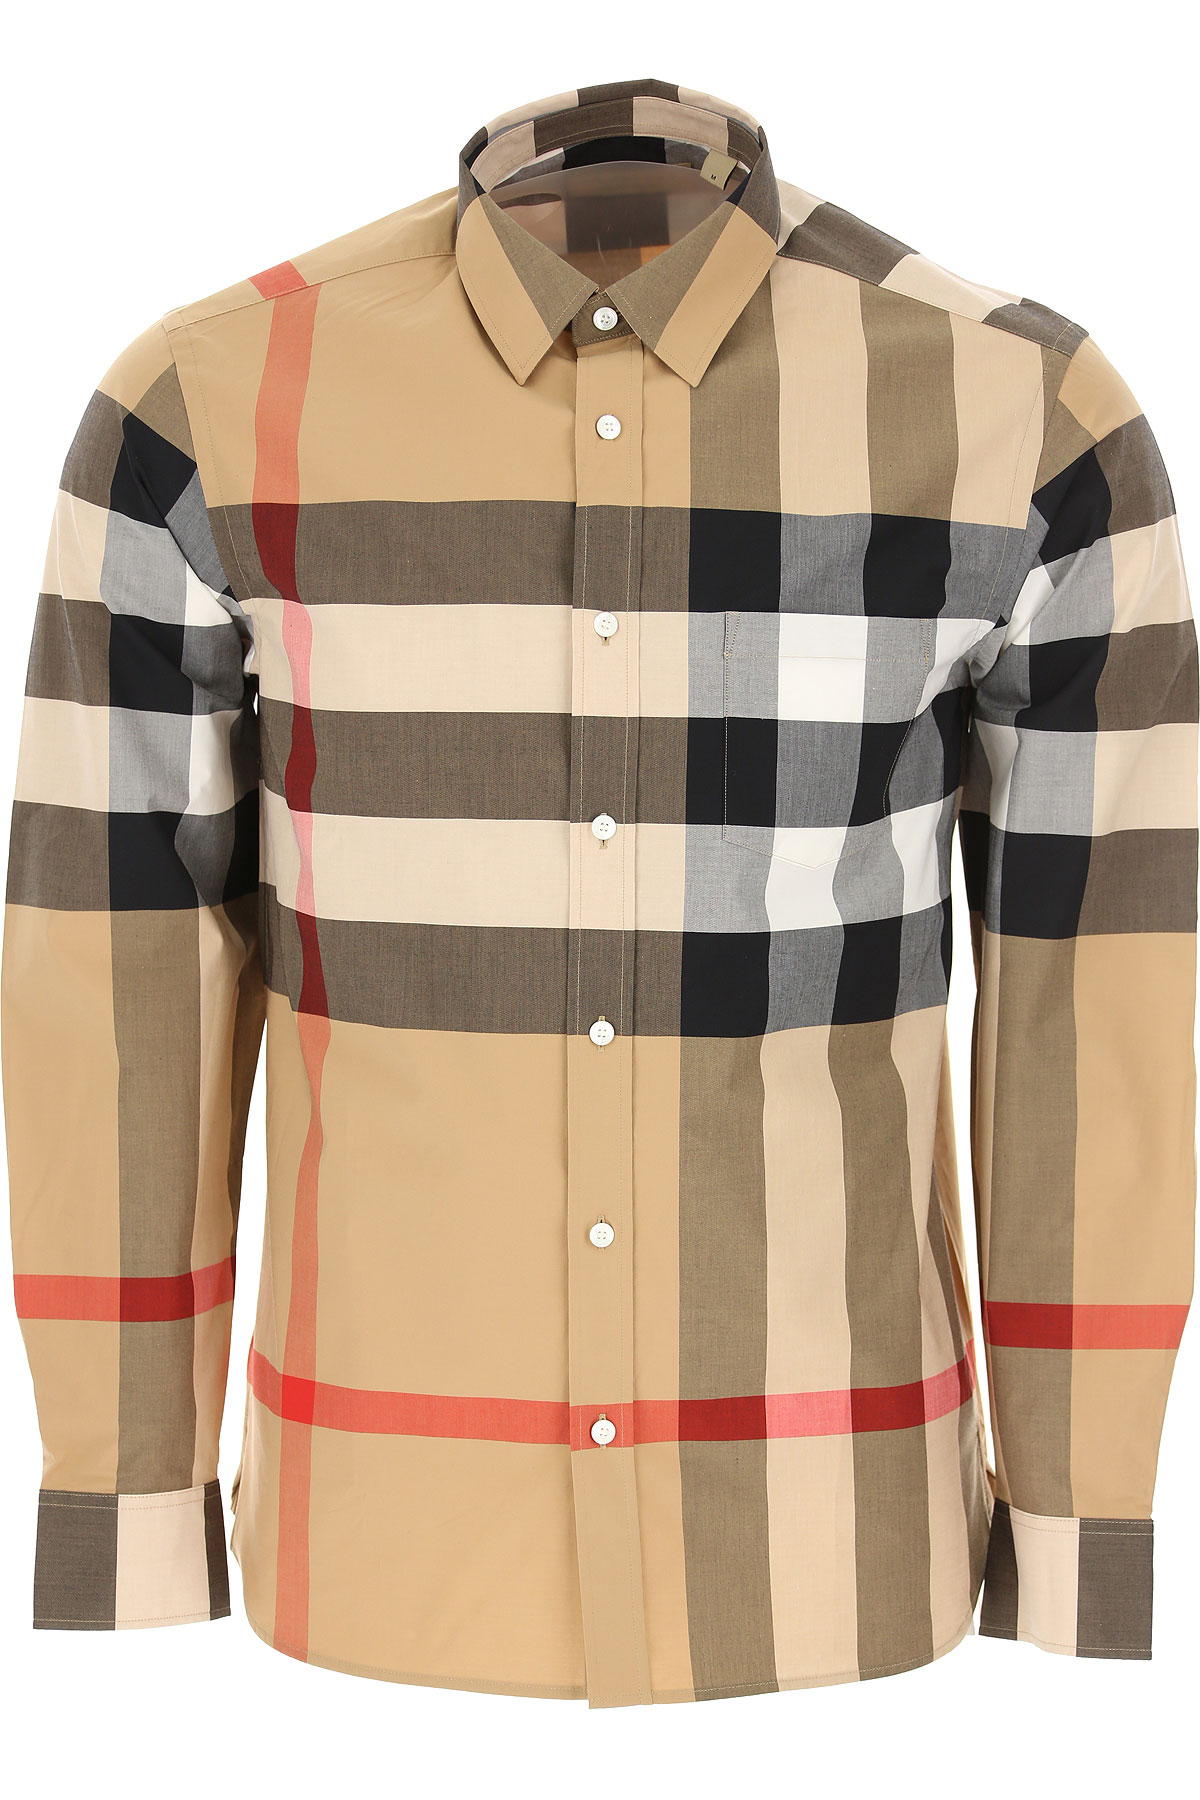 Mens Clothing Burberry, Style code: 8004827-a1051-